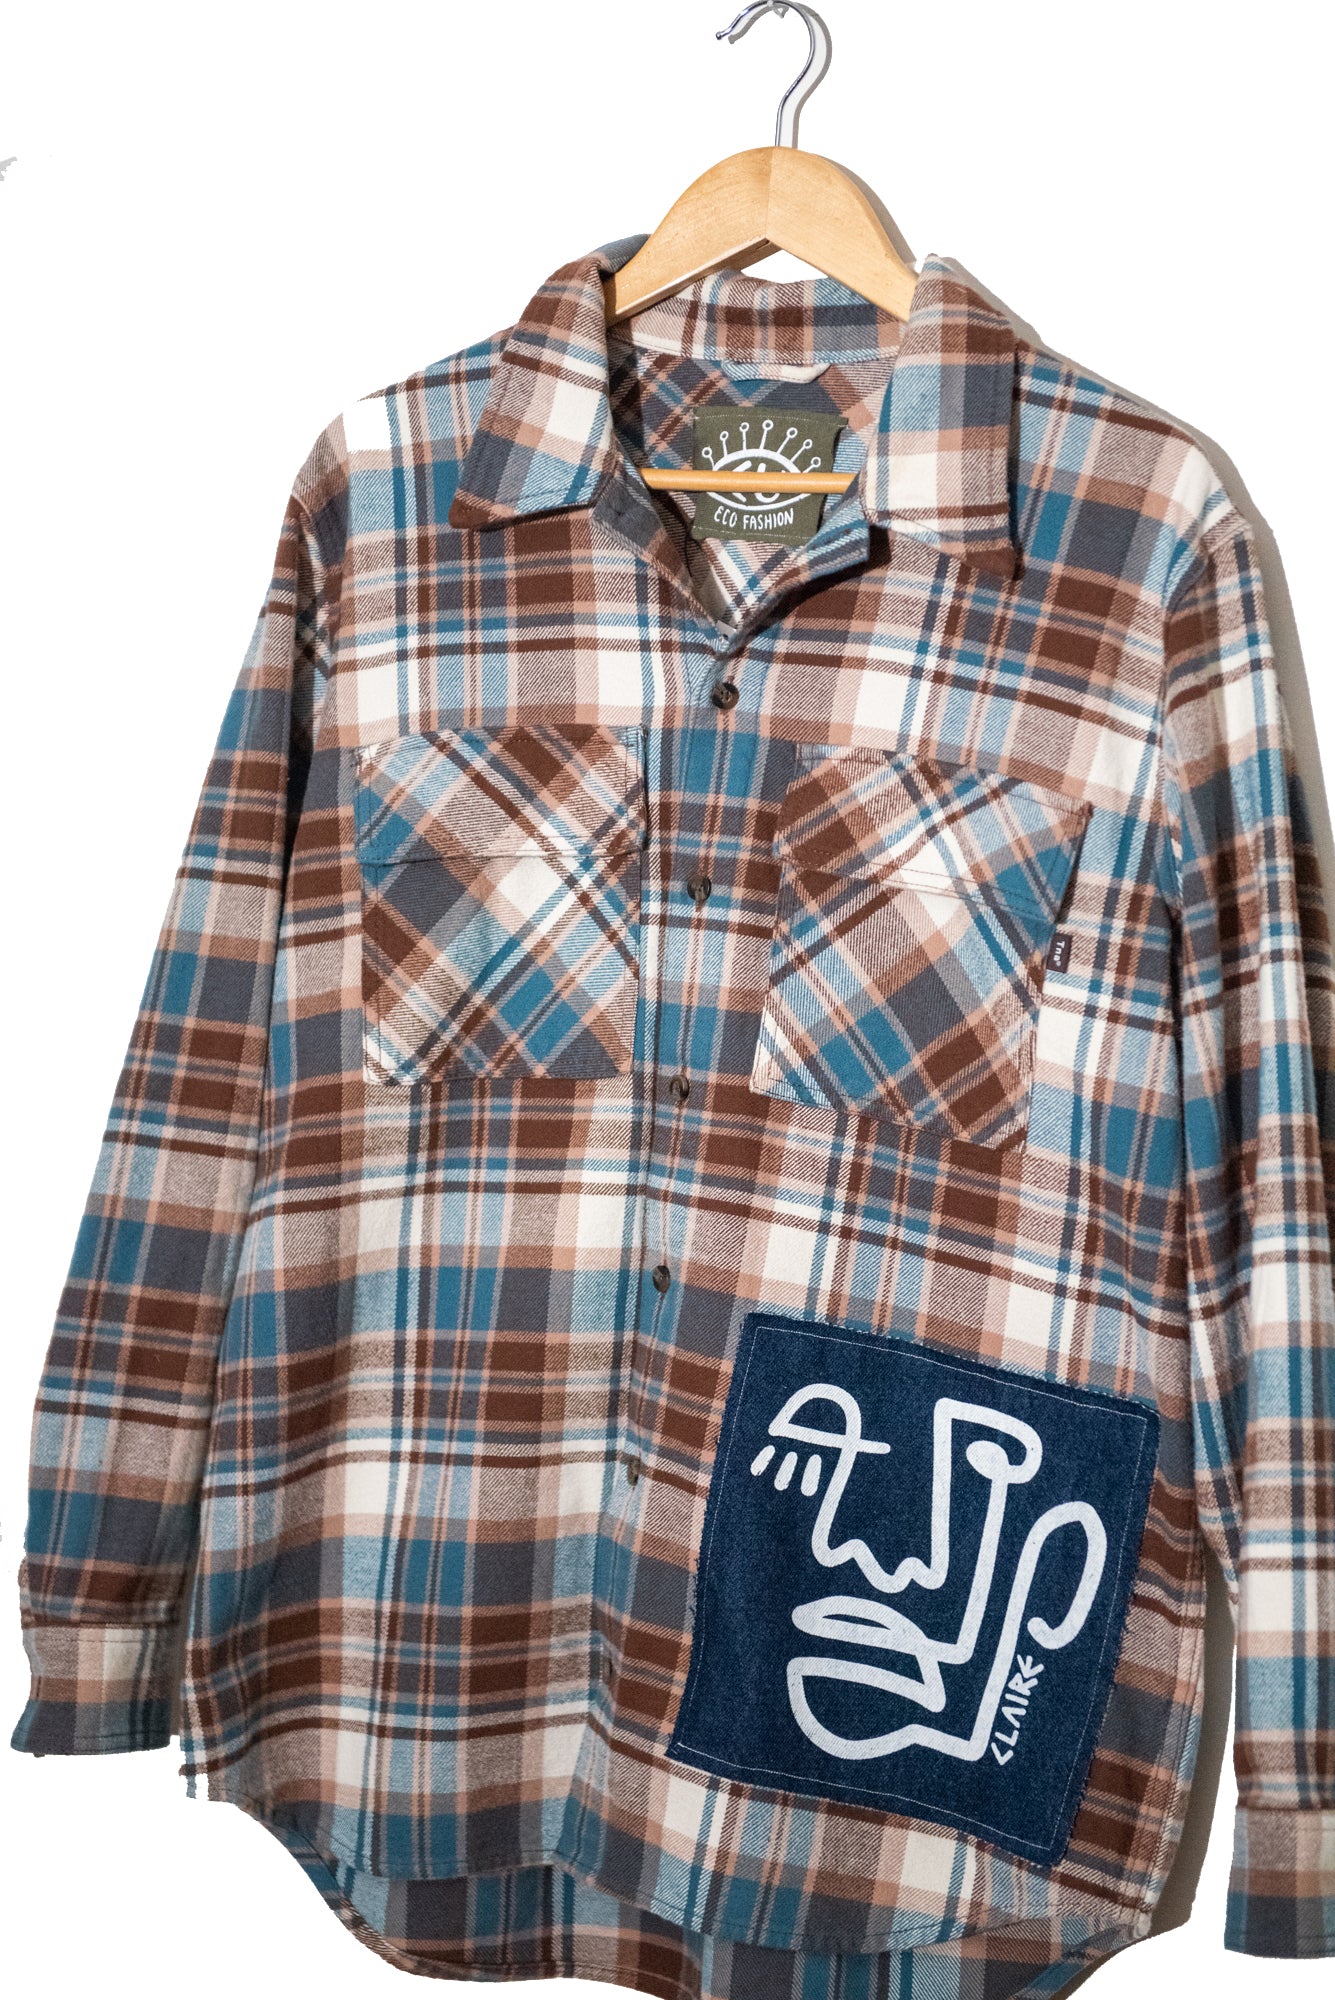 Muted with Jean Plaid Button-Up (L)